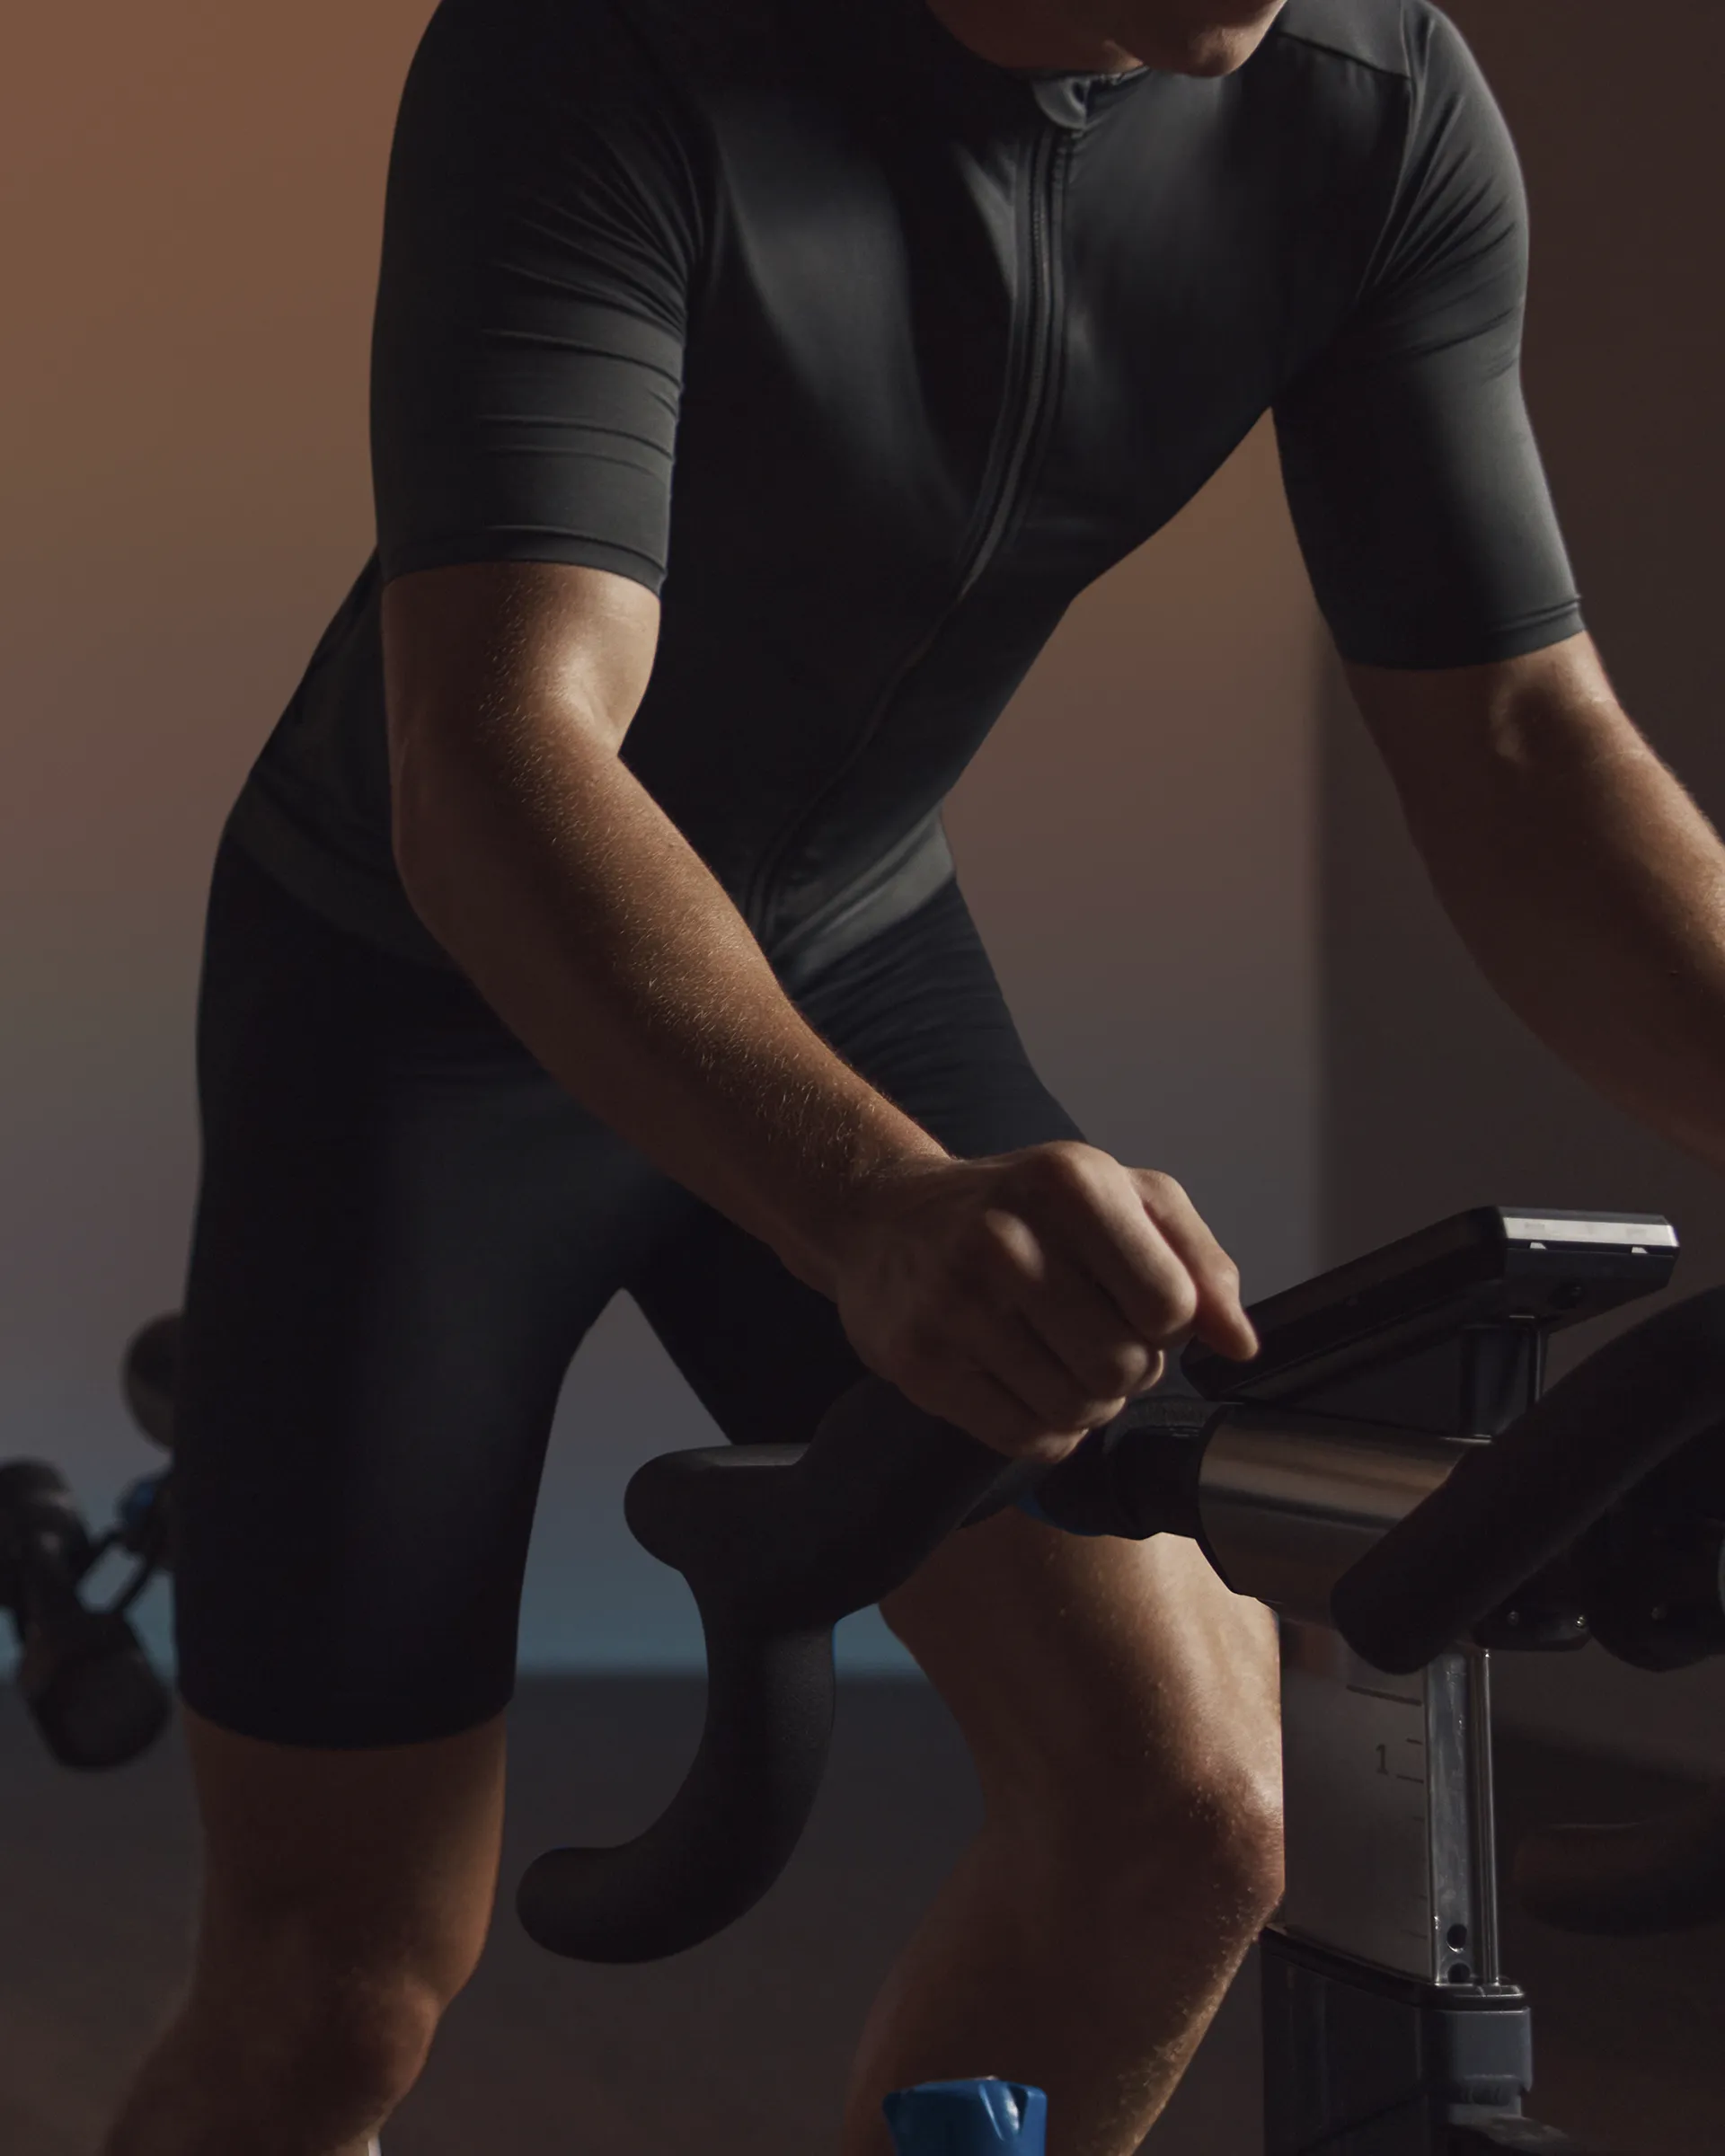 A cyclist seated on the bike riding in an EDG spin class